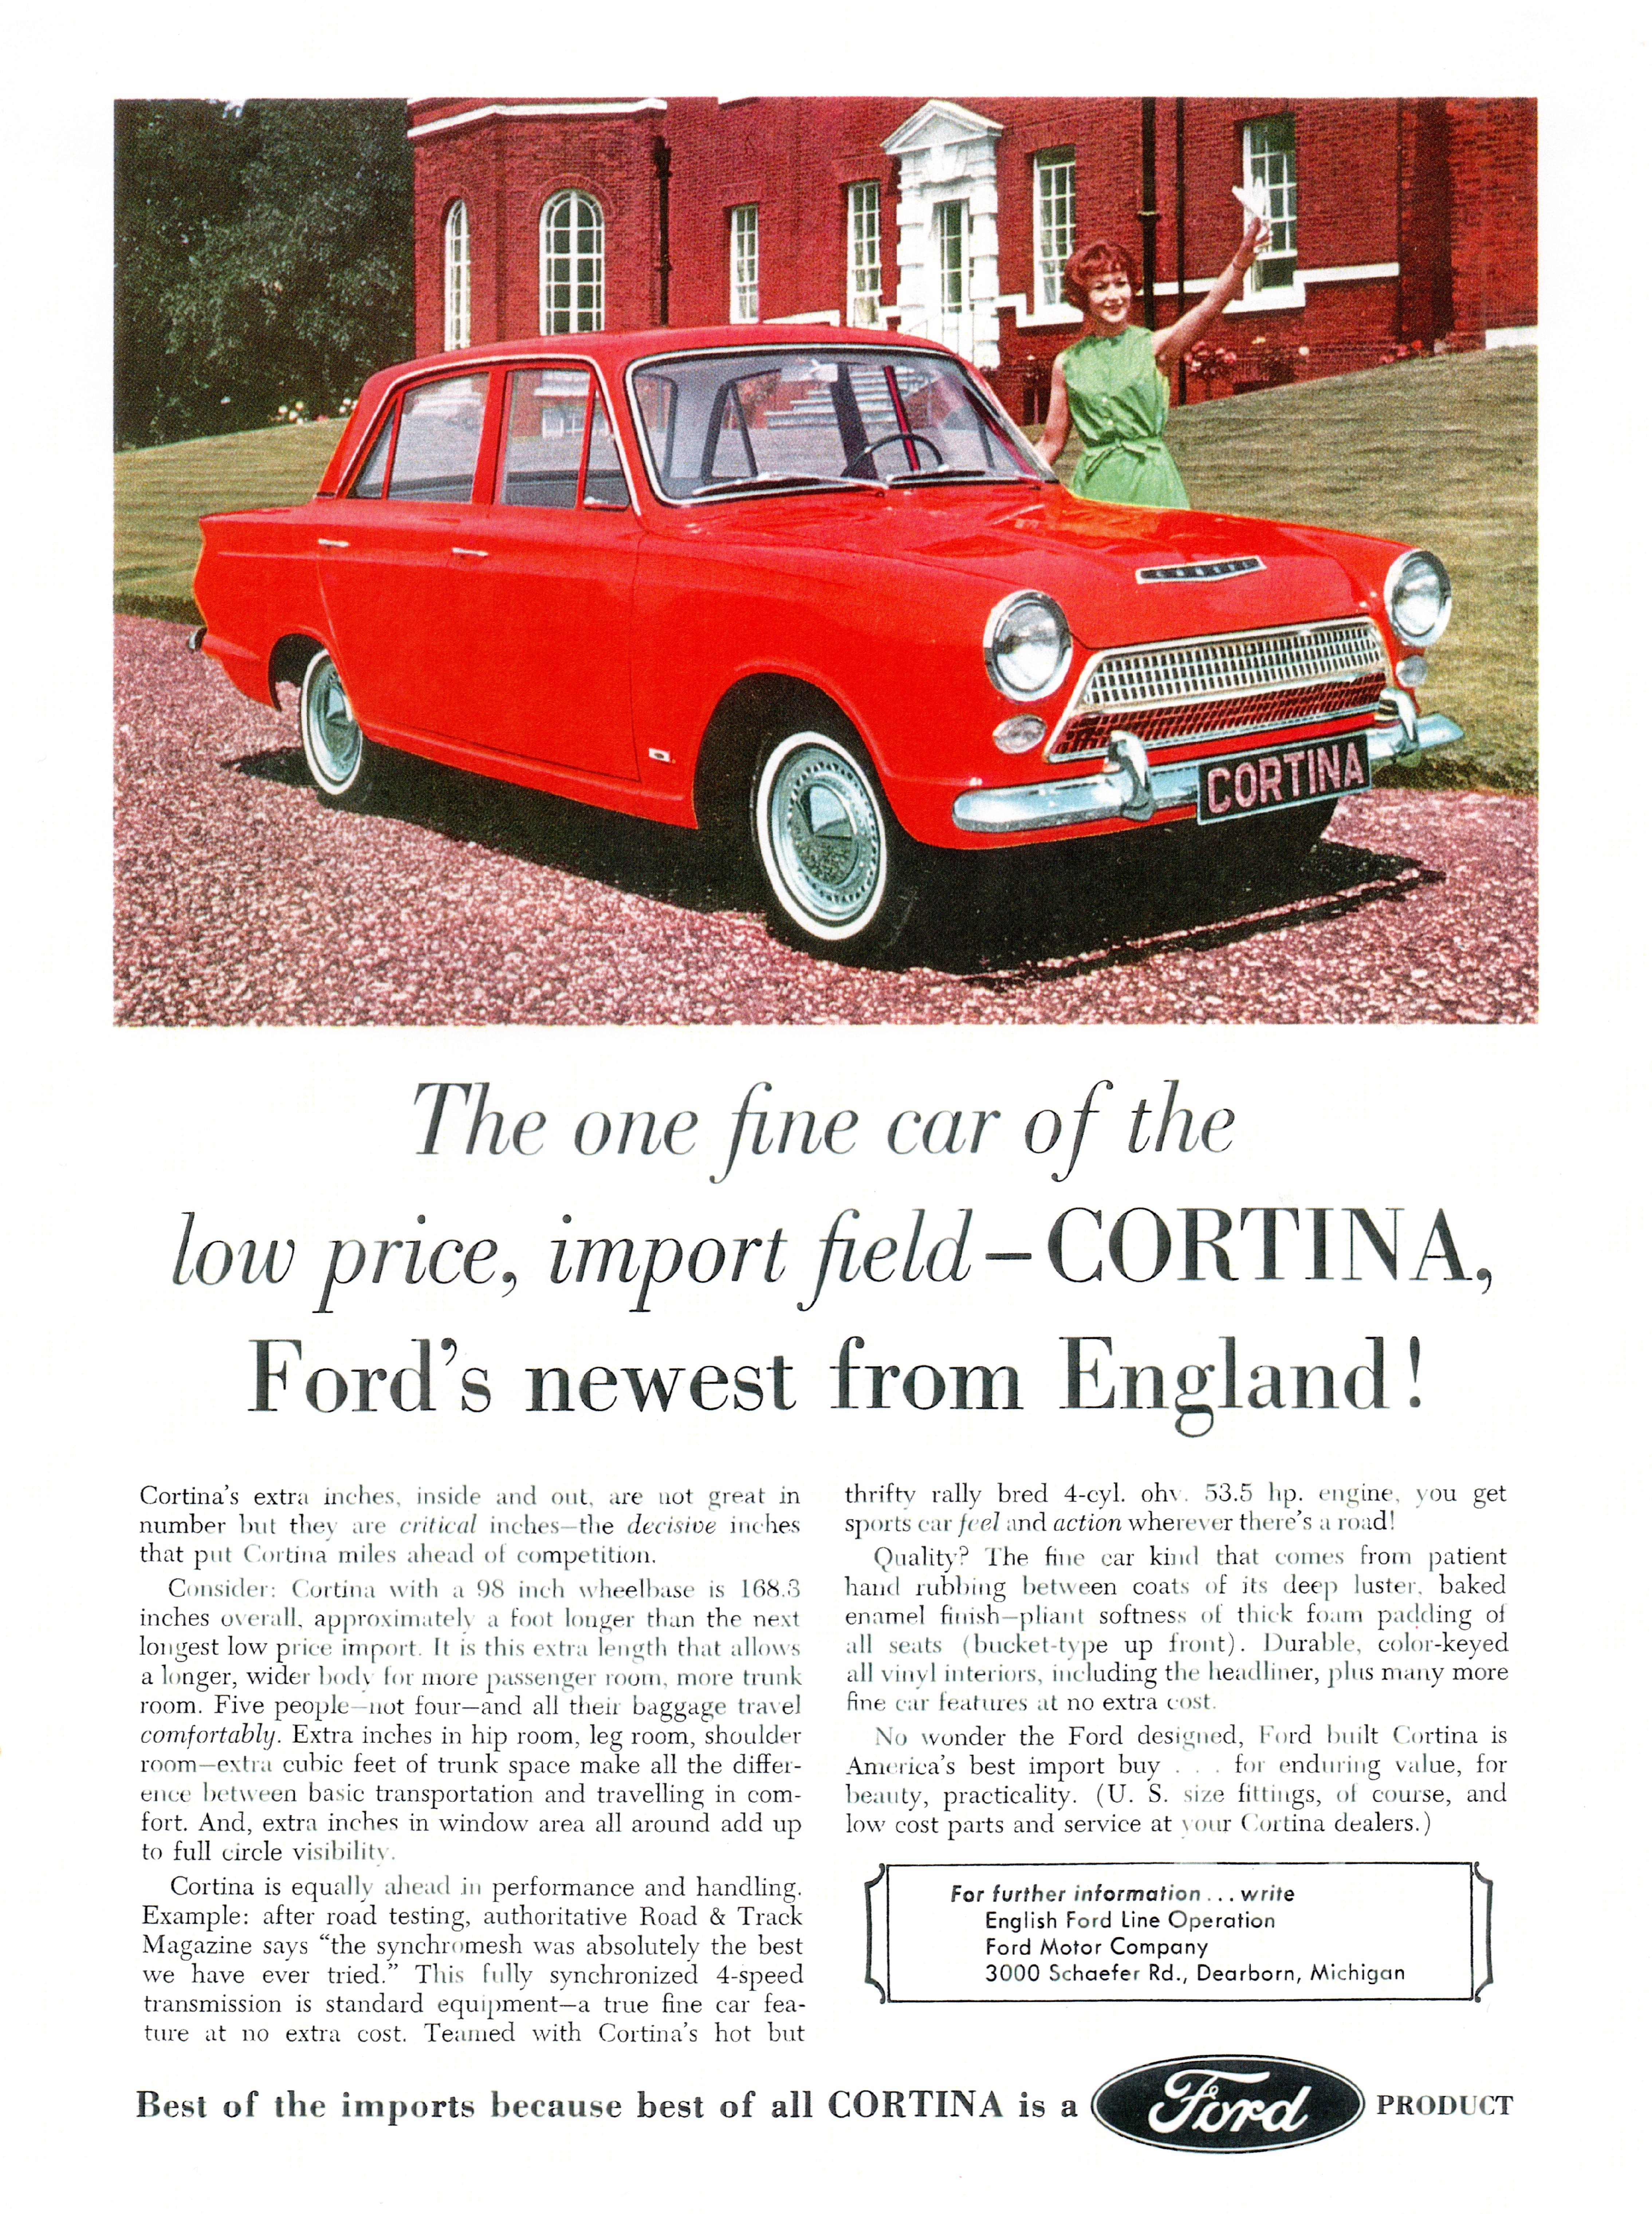 An American Ford Consul Cortina ad from 1963.